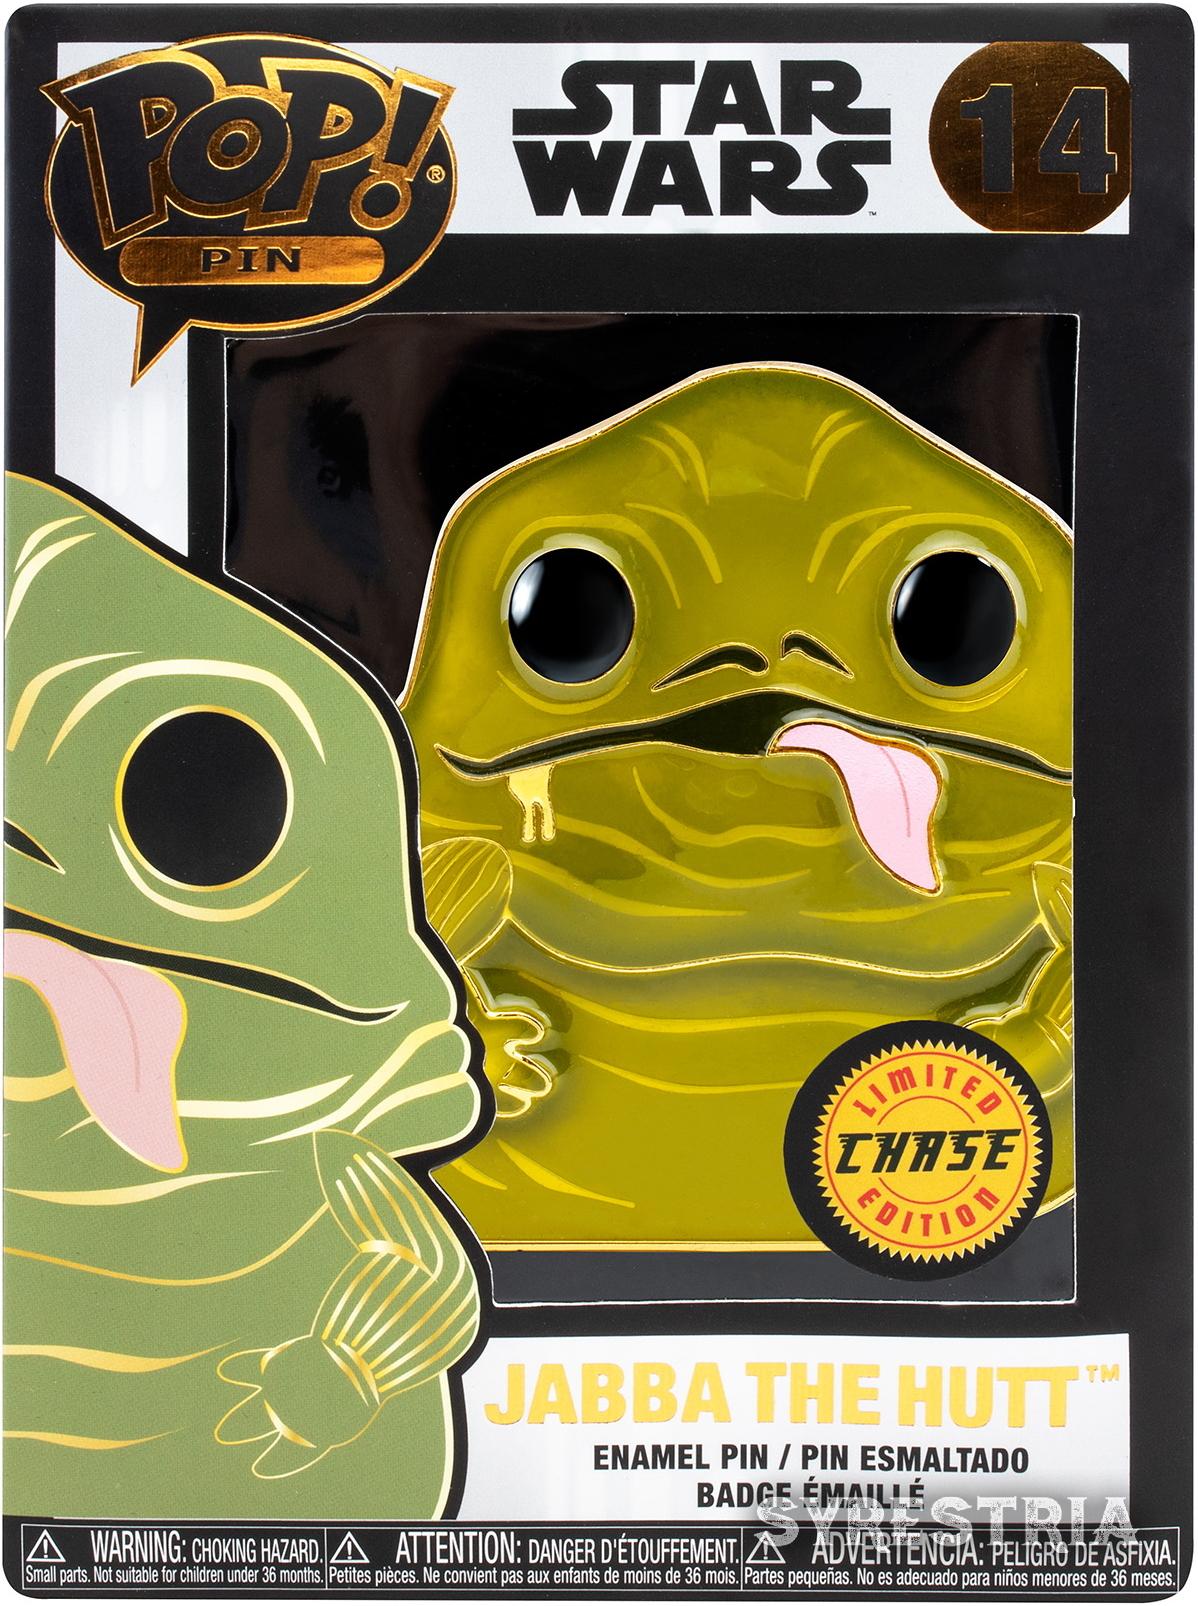 Star Wars - Jabba the Hutt 14 Limited Chase Edition - Funko Pin